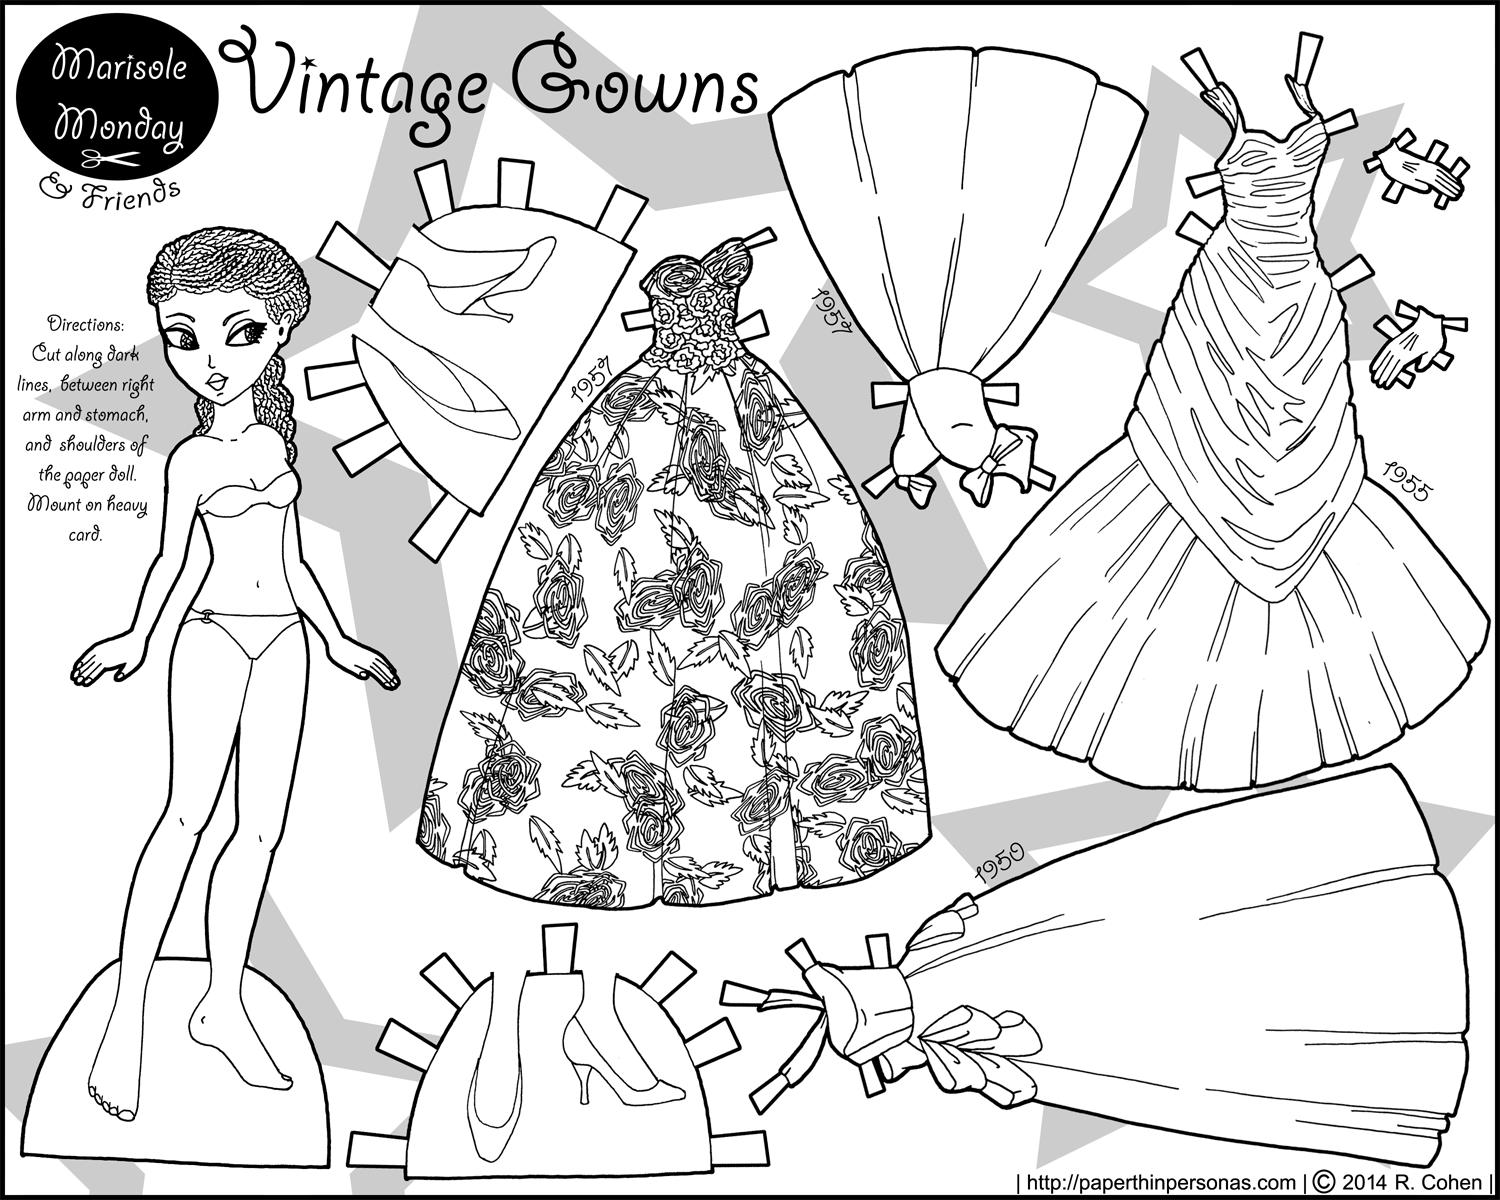 Vintage Gowns- 1950s Evening Gowns in Paper Doll Form 